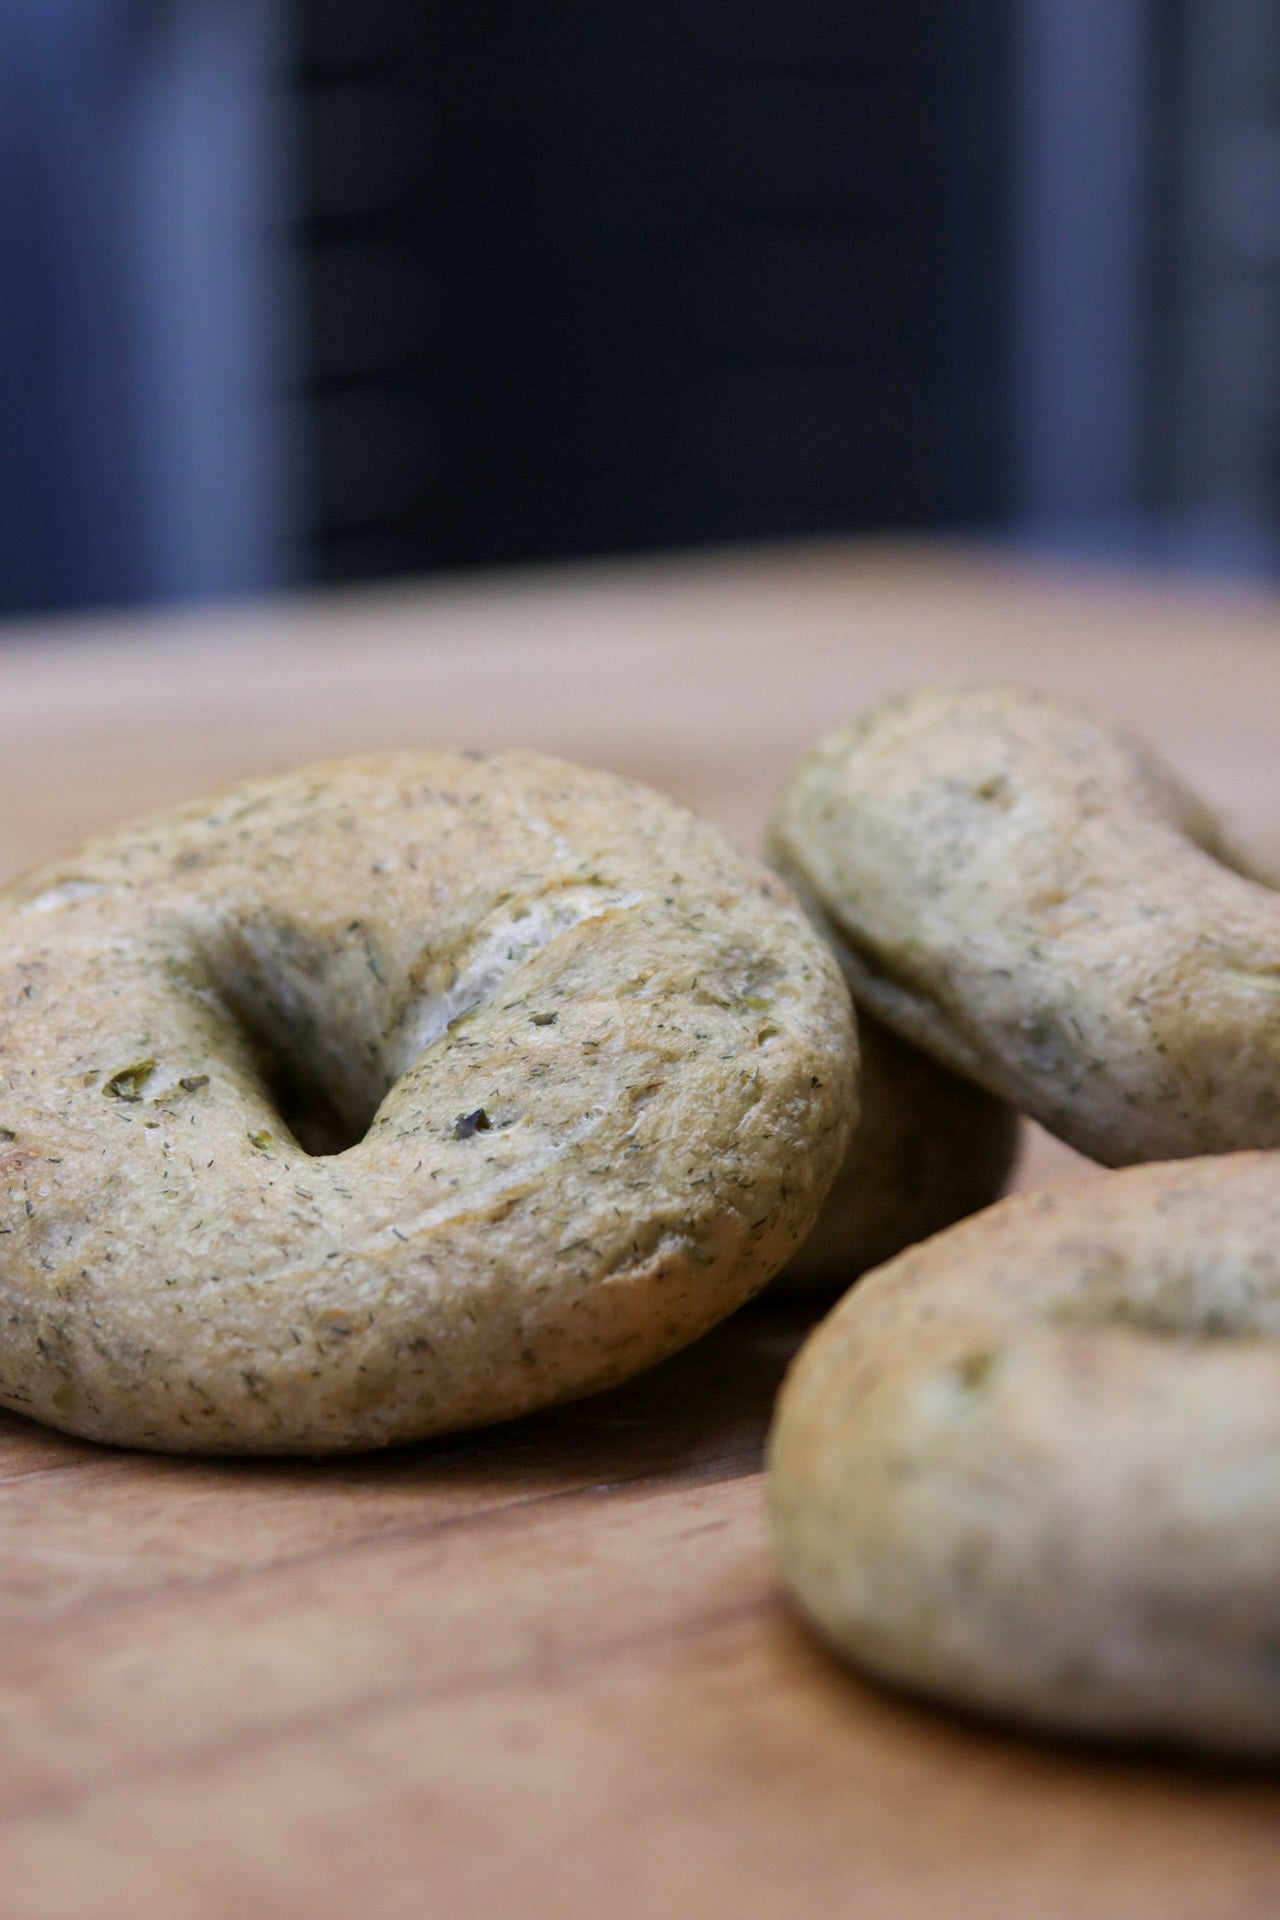 Dill pickle bagels- Only available SATURDAYS